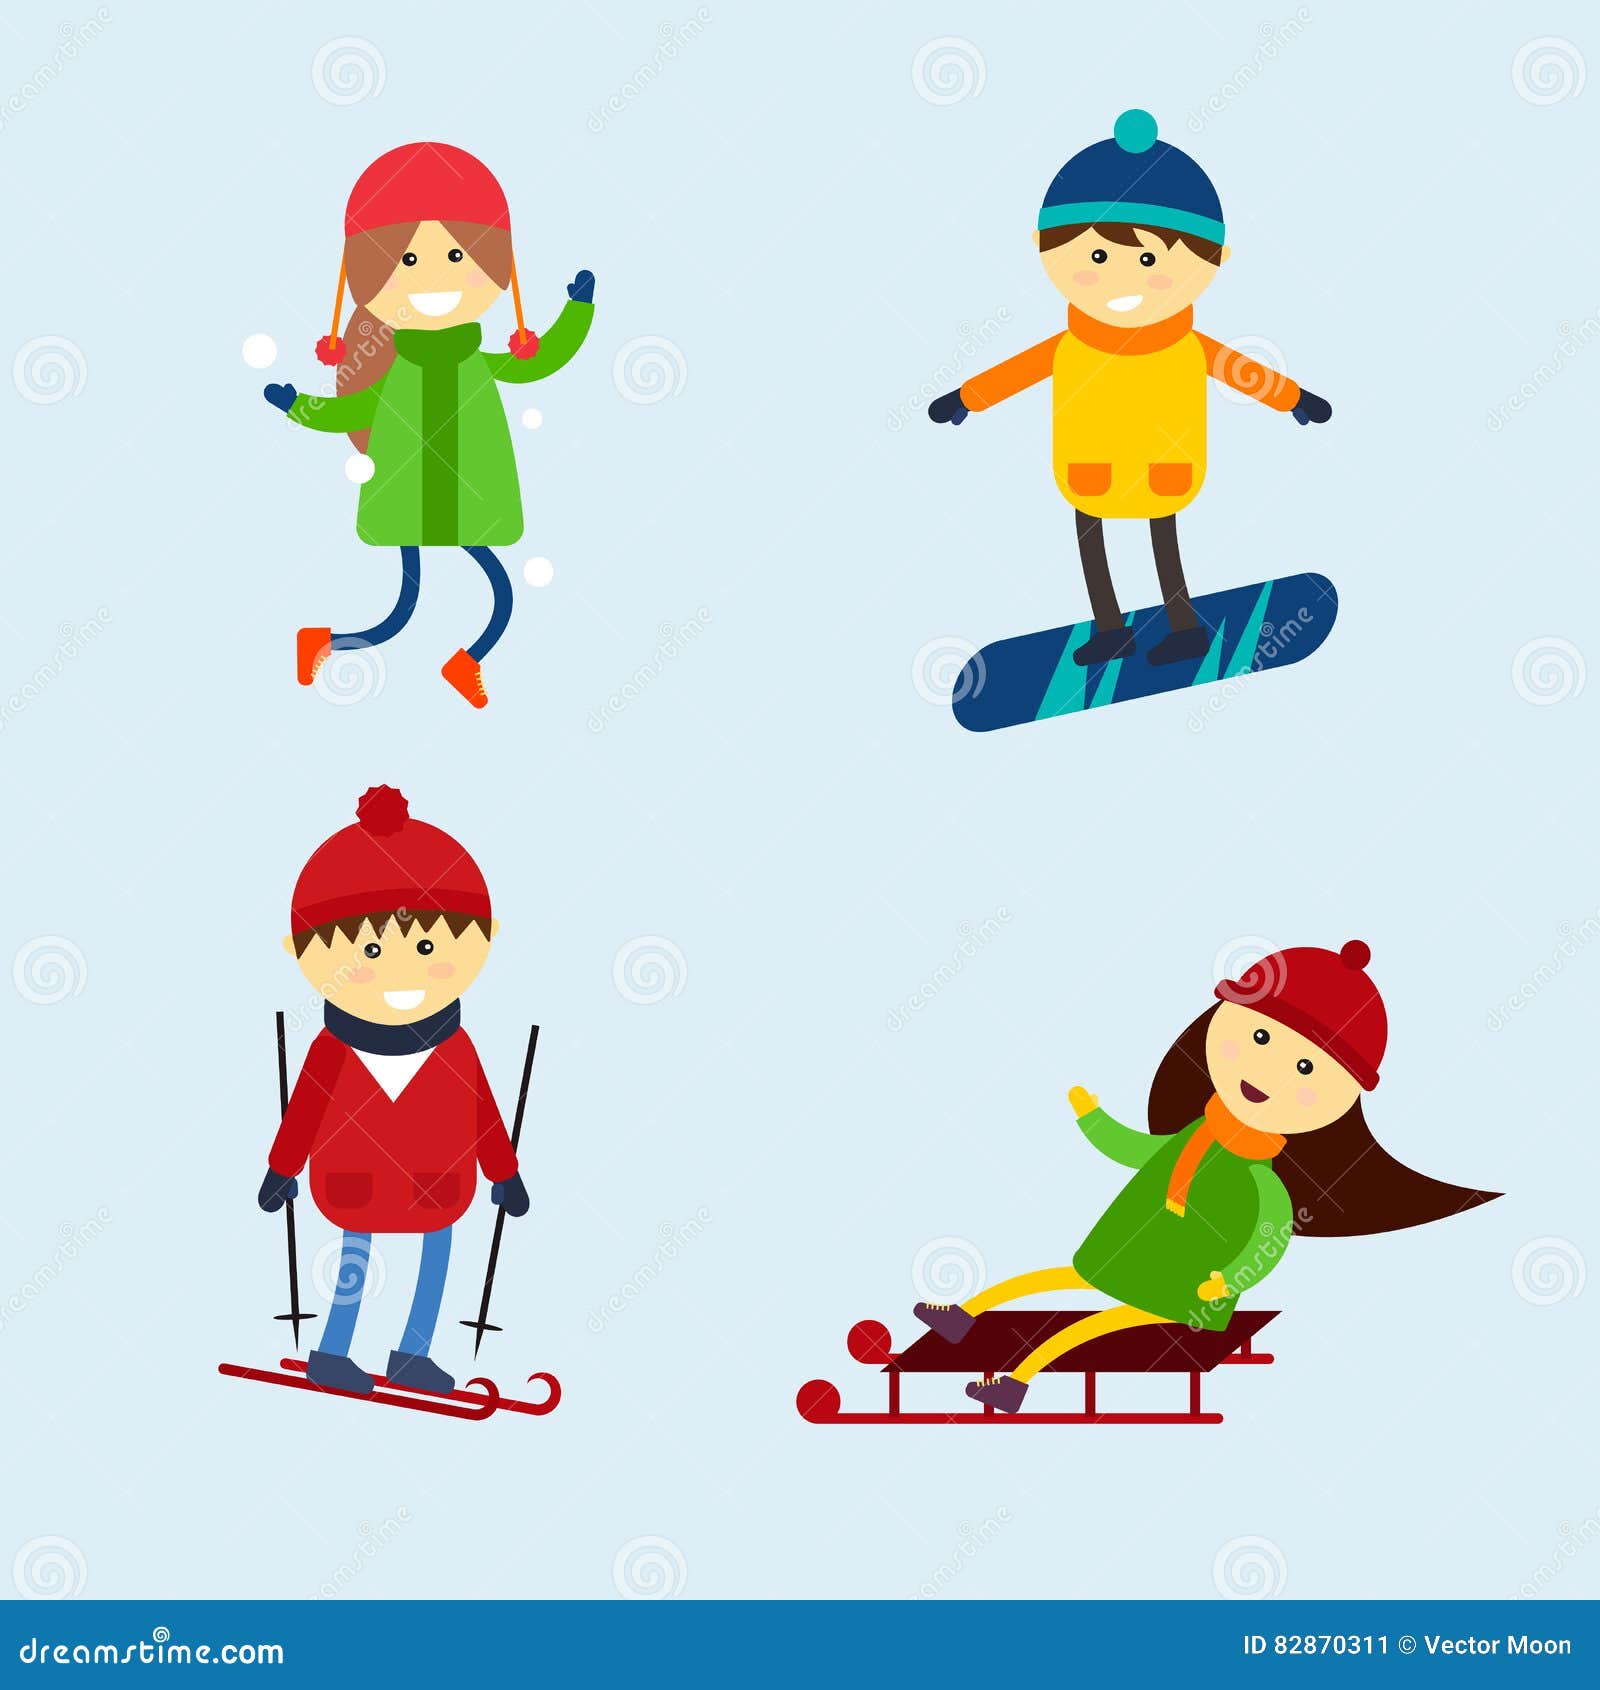 winter games clipart - photo #11